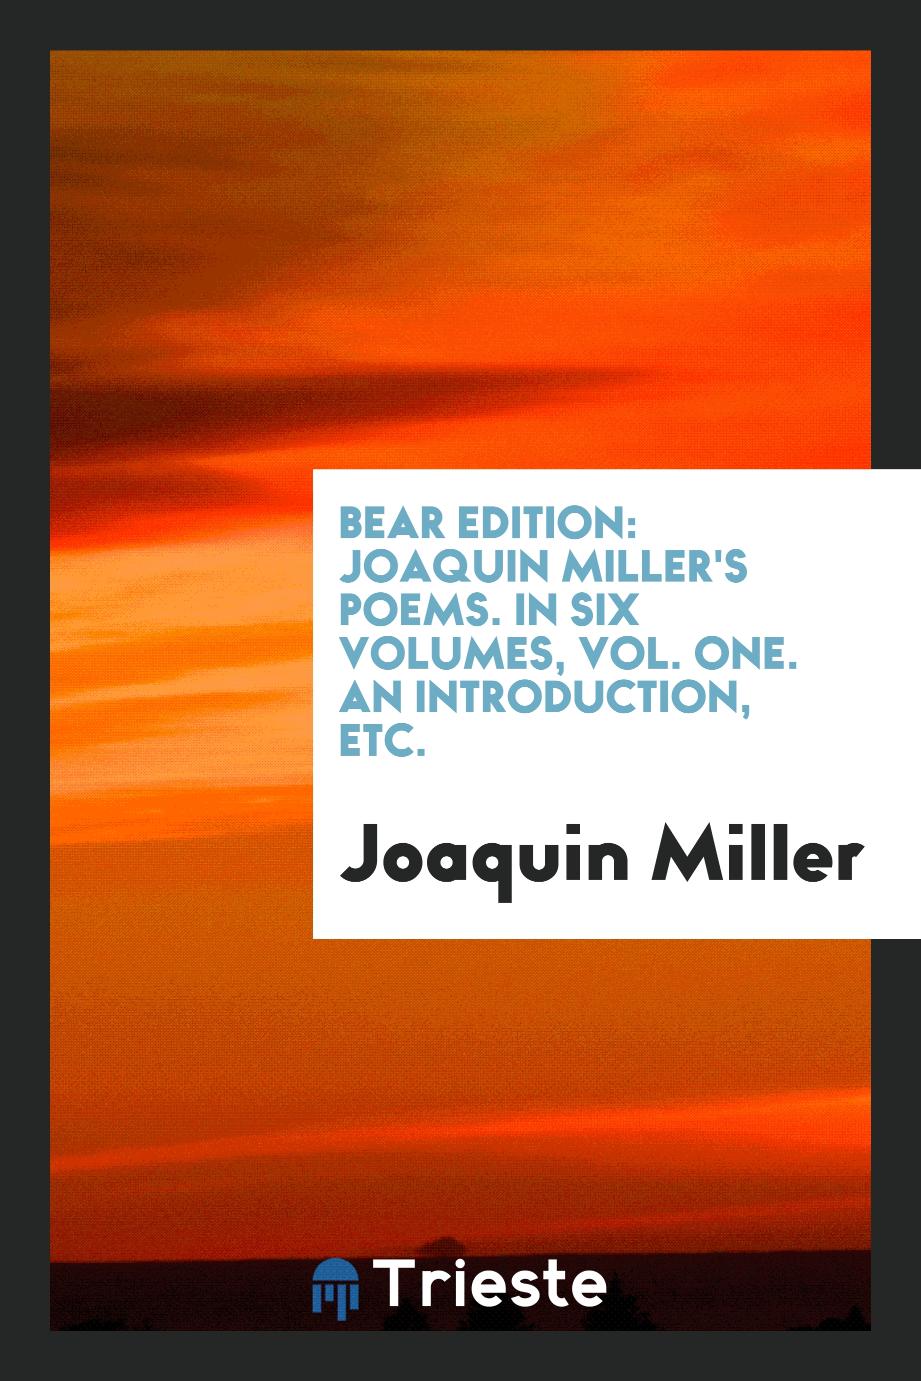 Bear Edition: Joaquin Miller's Poems. In Six Volumes, Vol. One. An Introduction, Etc.